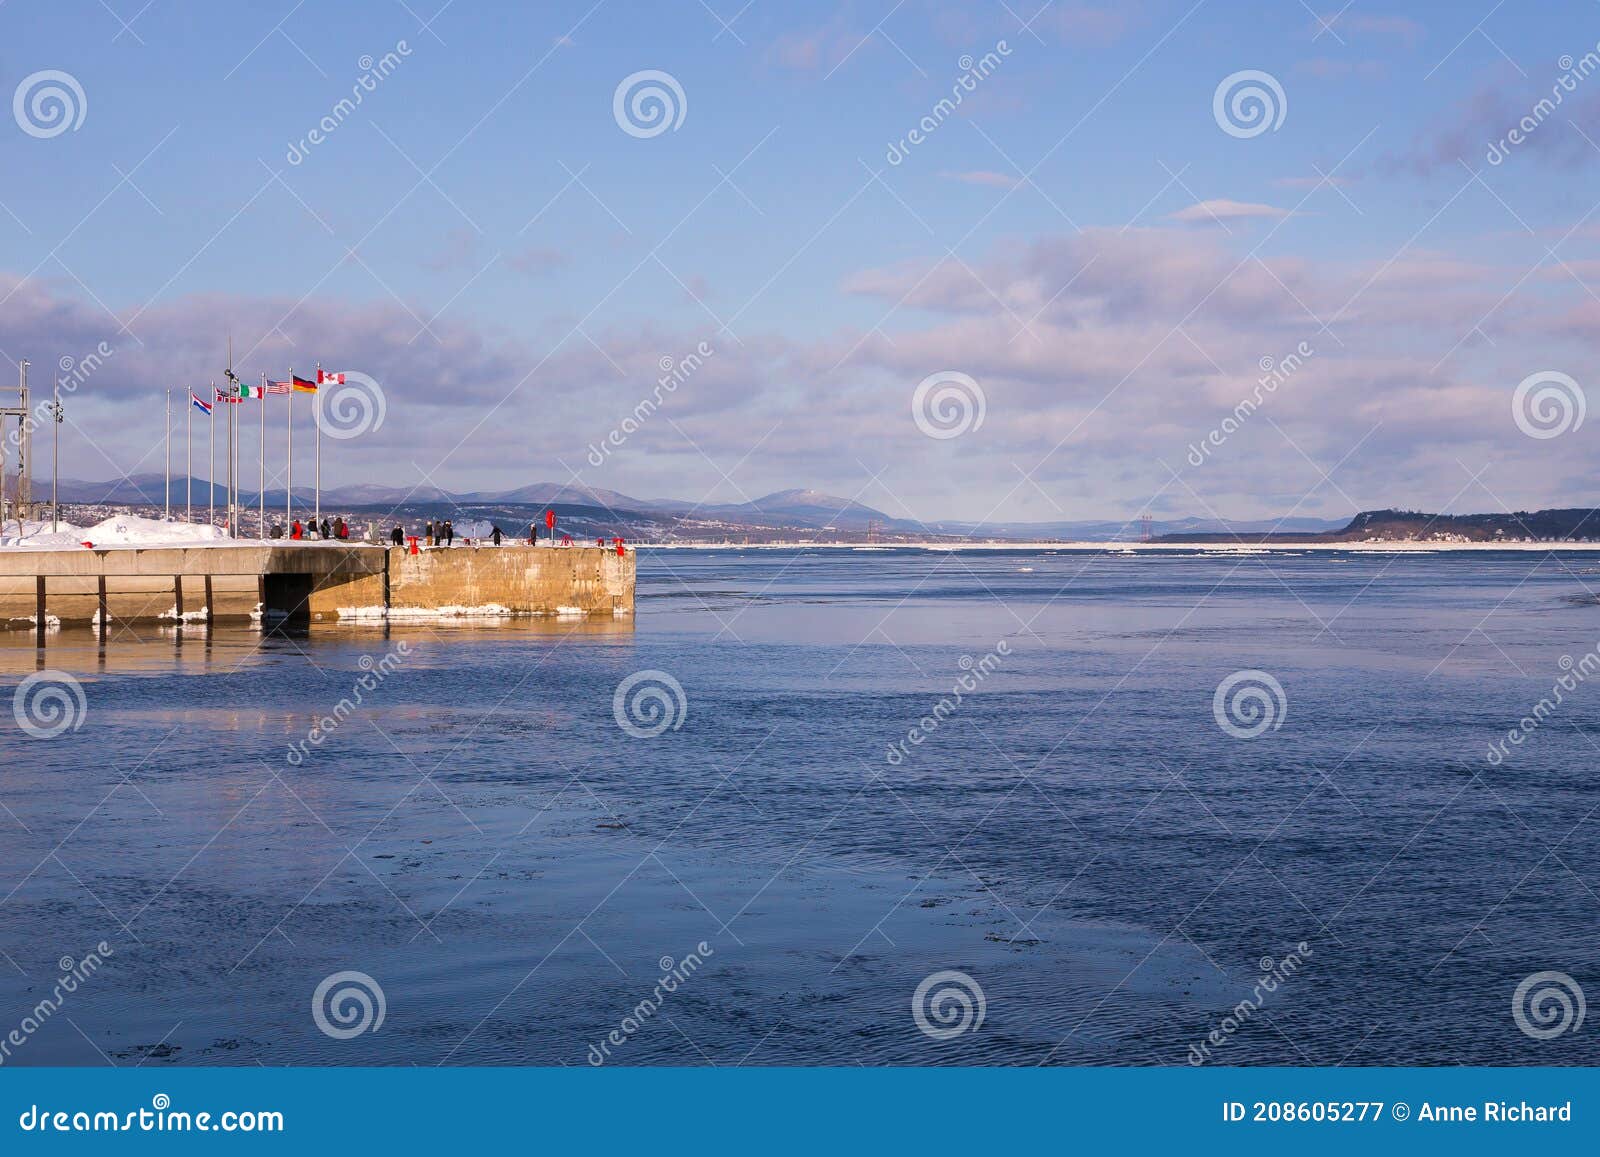 wharf in the old town harbour sector, with the island of orleans and the north shore in the background, quebec city